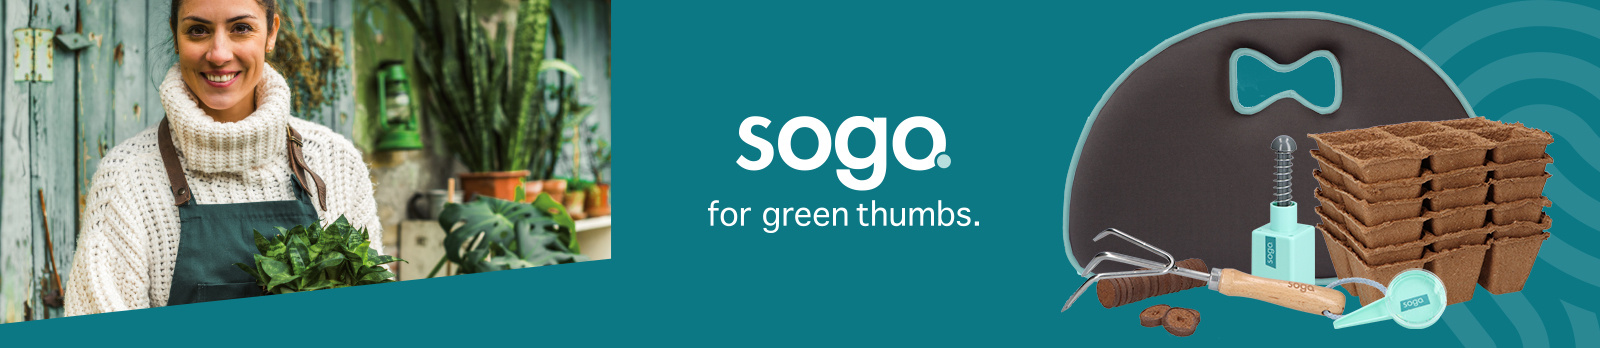 SOGO. FOR GREEN THUMBS